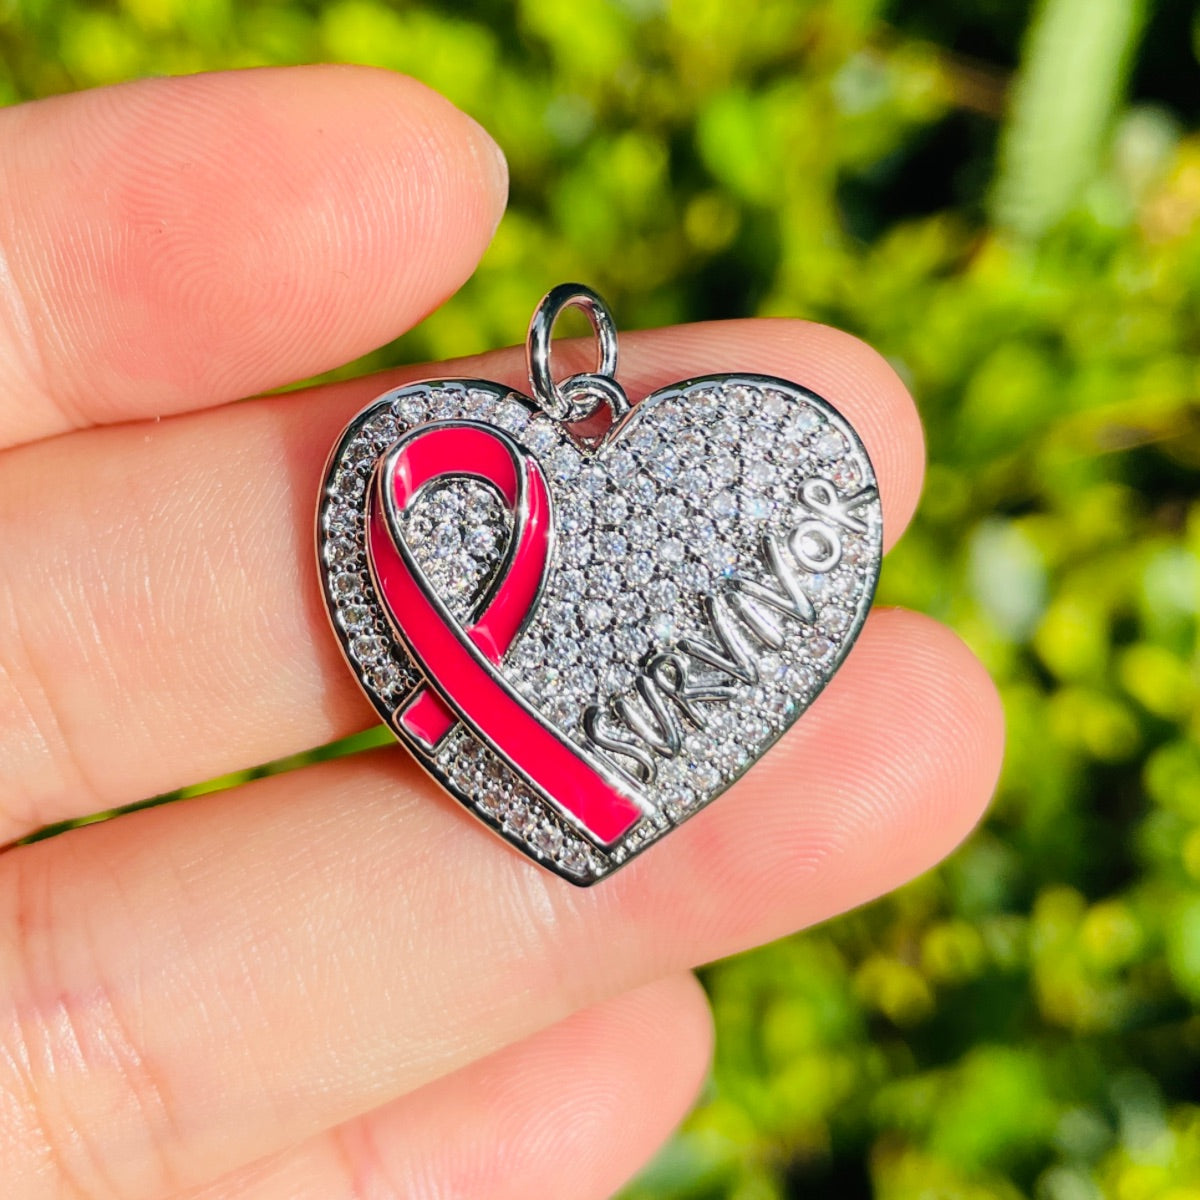 10pcs/lot CZ Pave Pink Ribbon Heart Survivor Word Charms - Breast Cancer Awareness Silver CZ Paved Charms Breast Cancer Awareness Hearts New Charms Arrivals Charms Beads Beyond